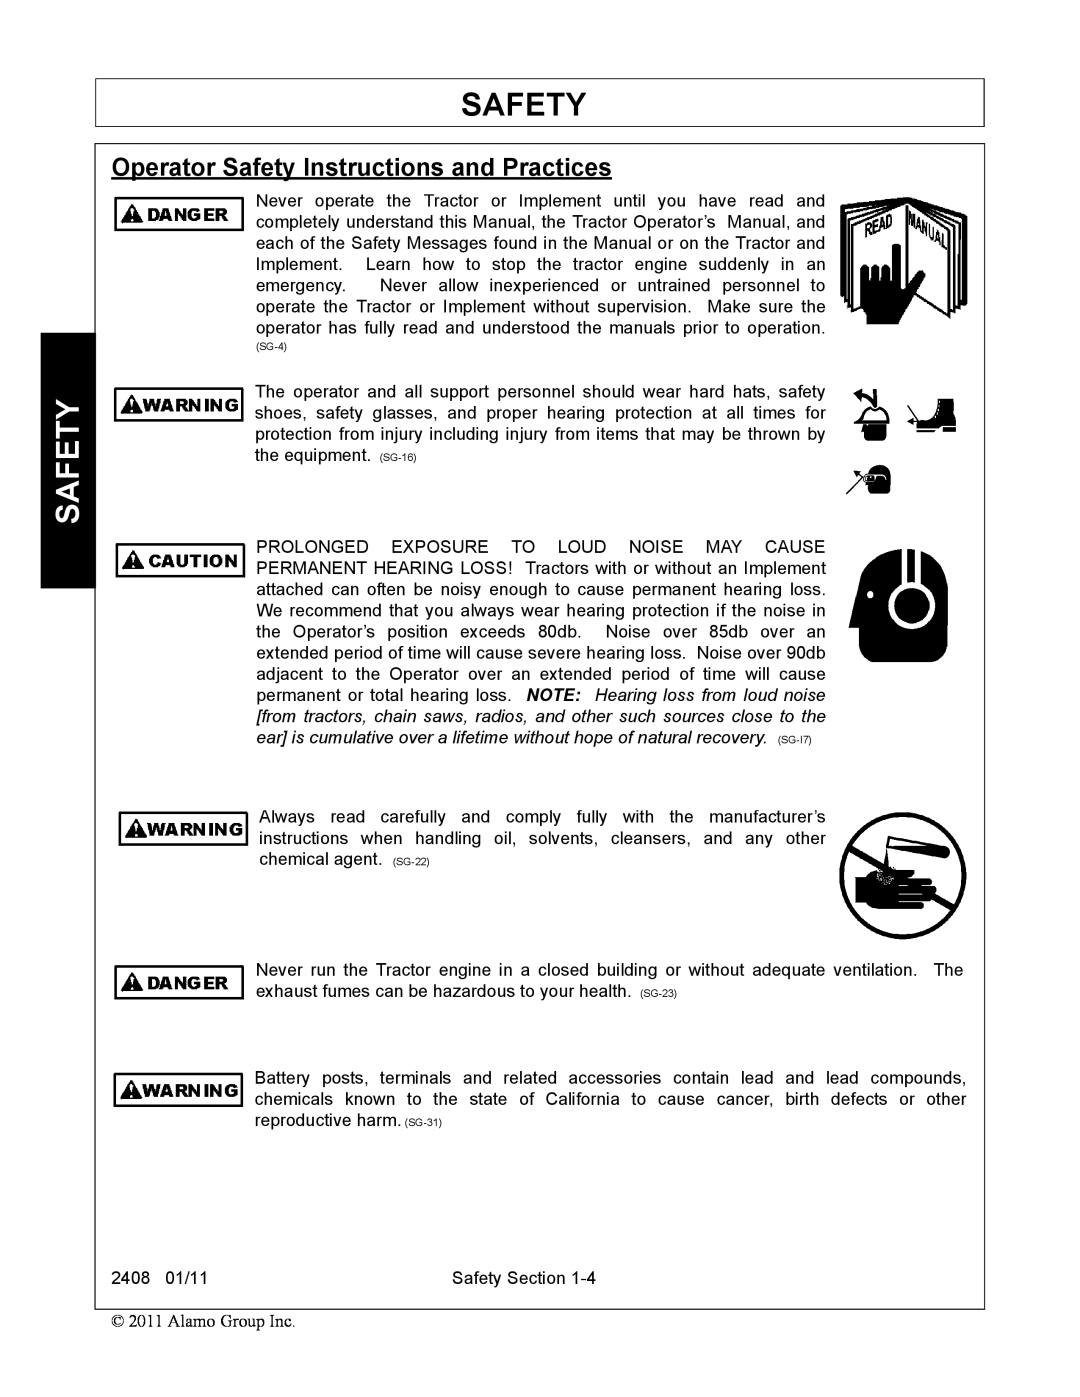 Rhino Mounts 2408 manual Operator Safety Instructions and Practices, SG-4 